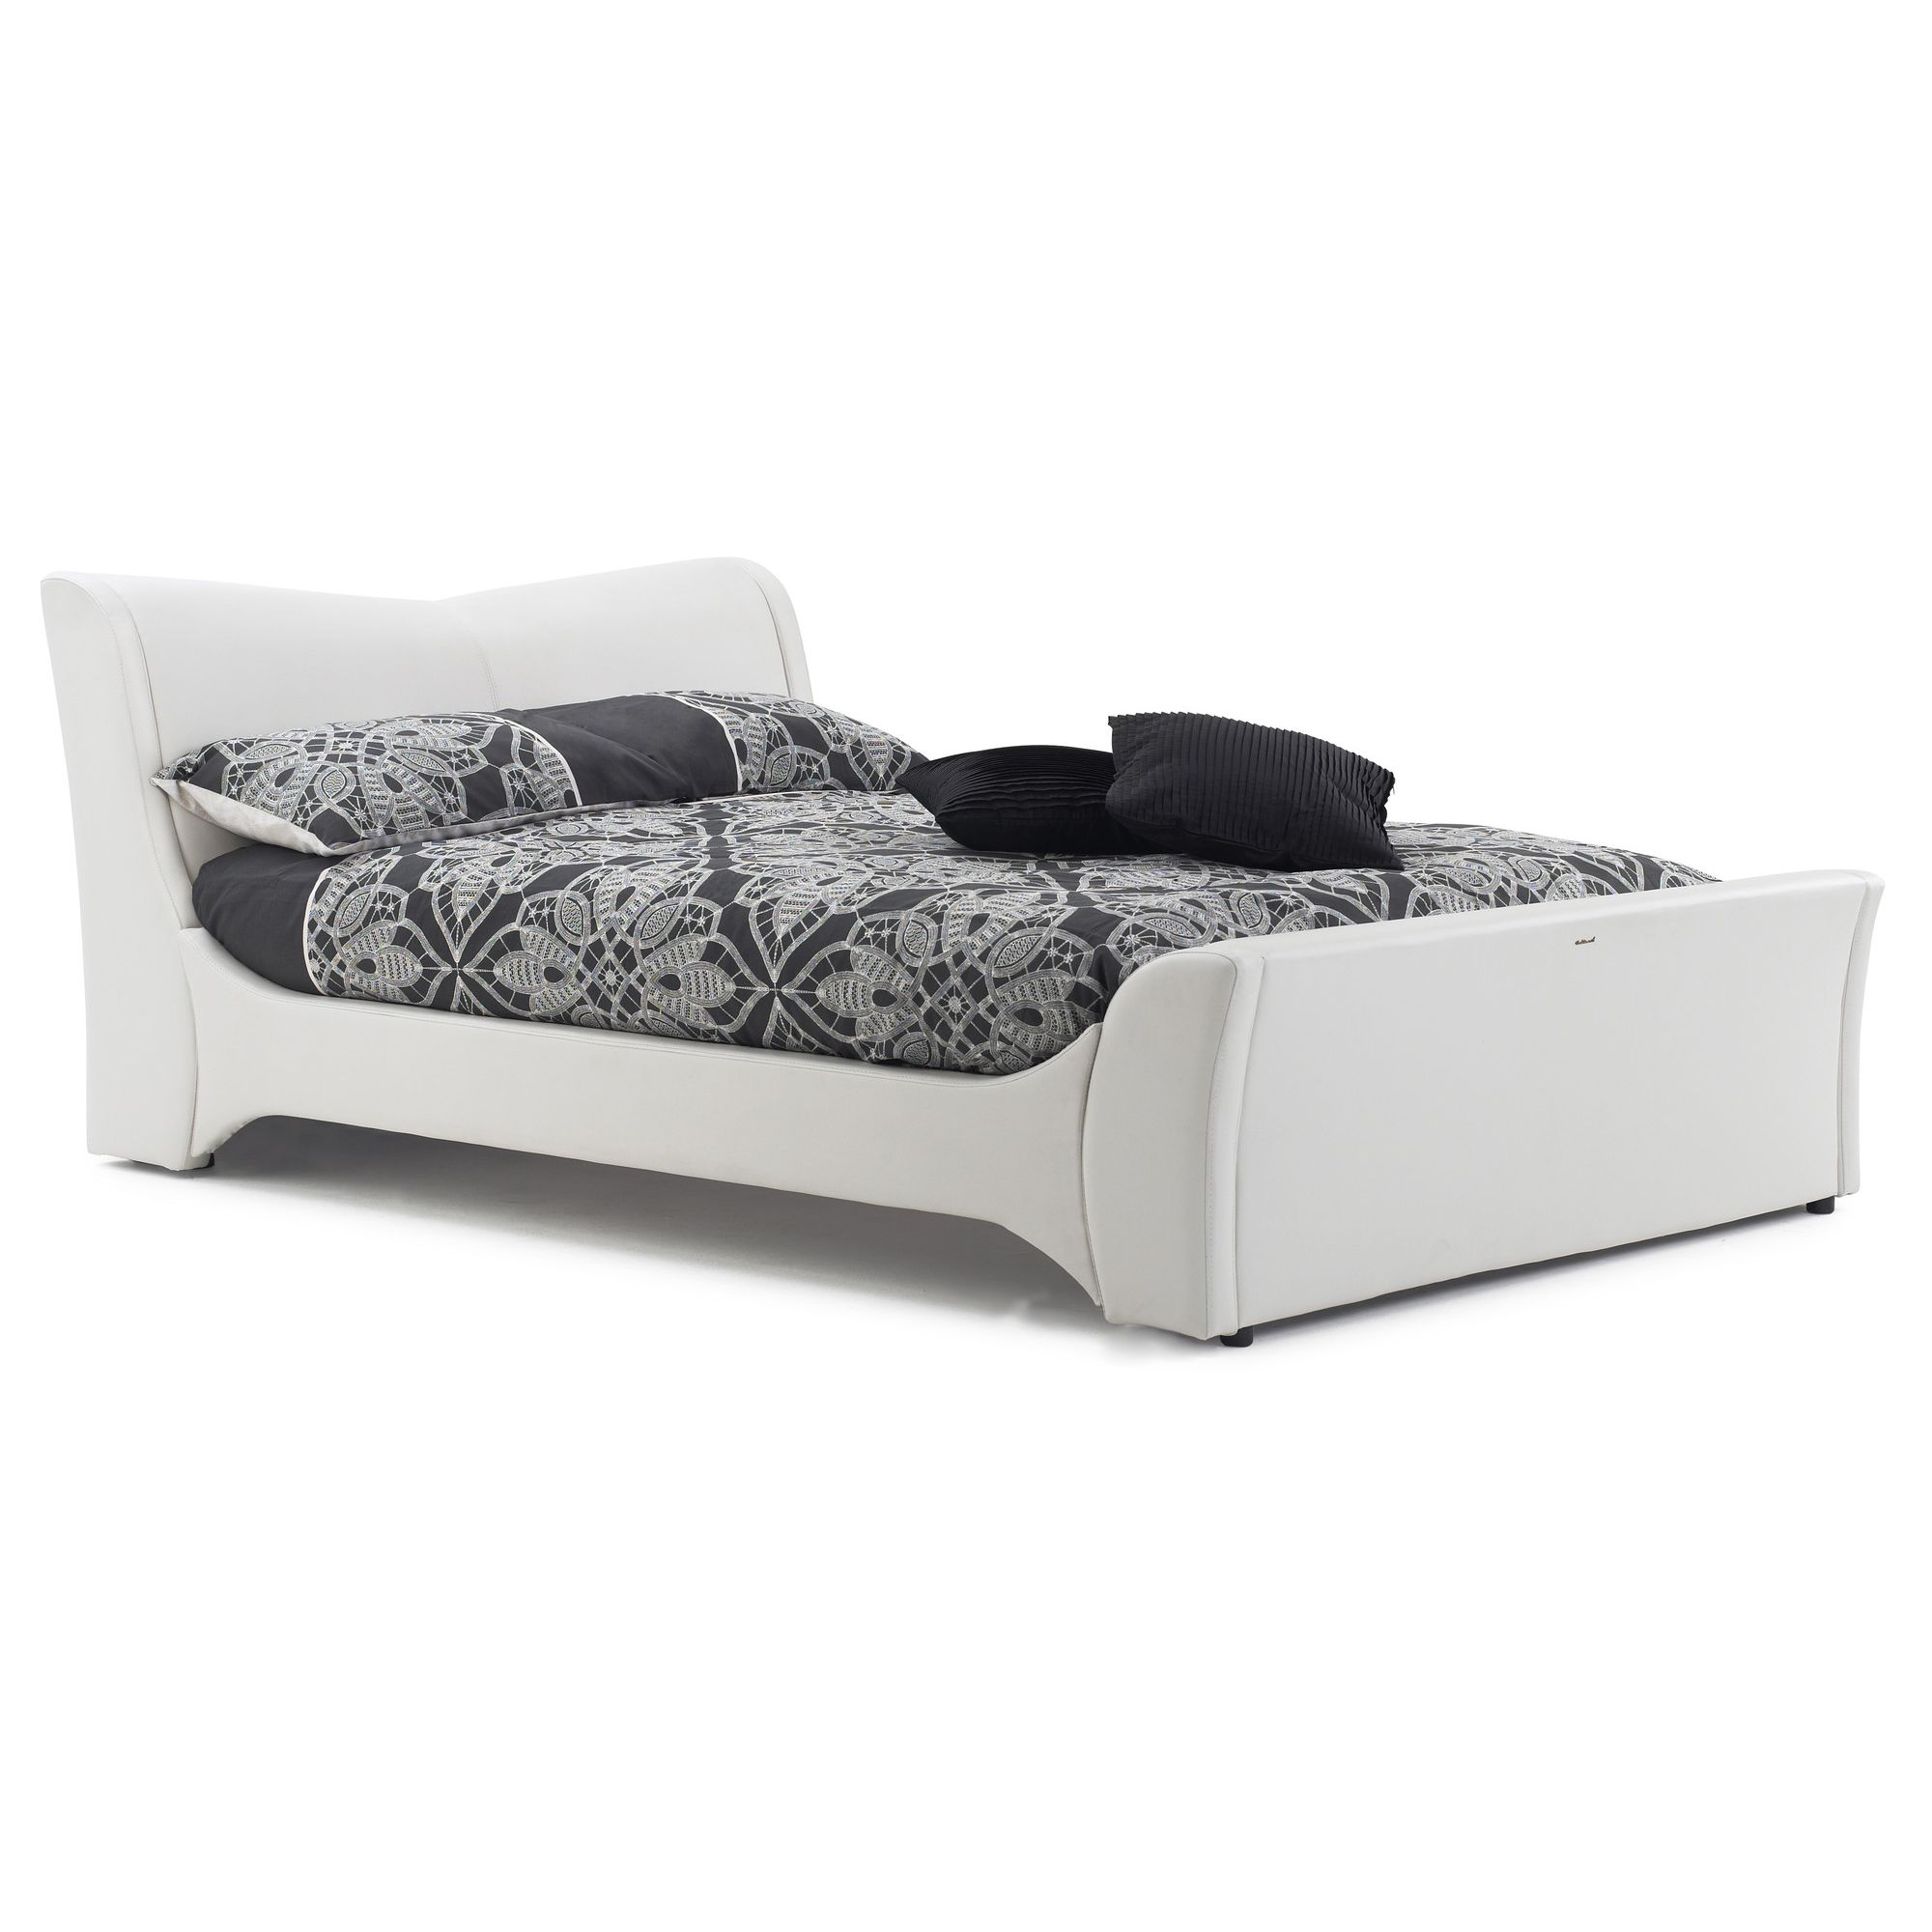 Frank Bosworth Veneto Leather Bed - Double - White at Tesco Direct